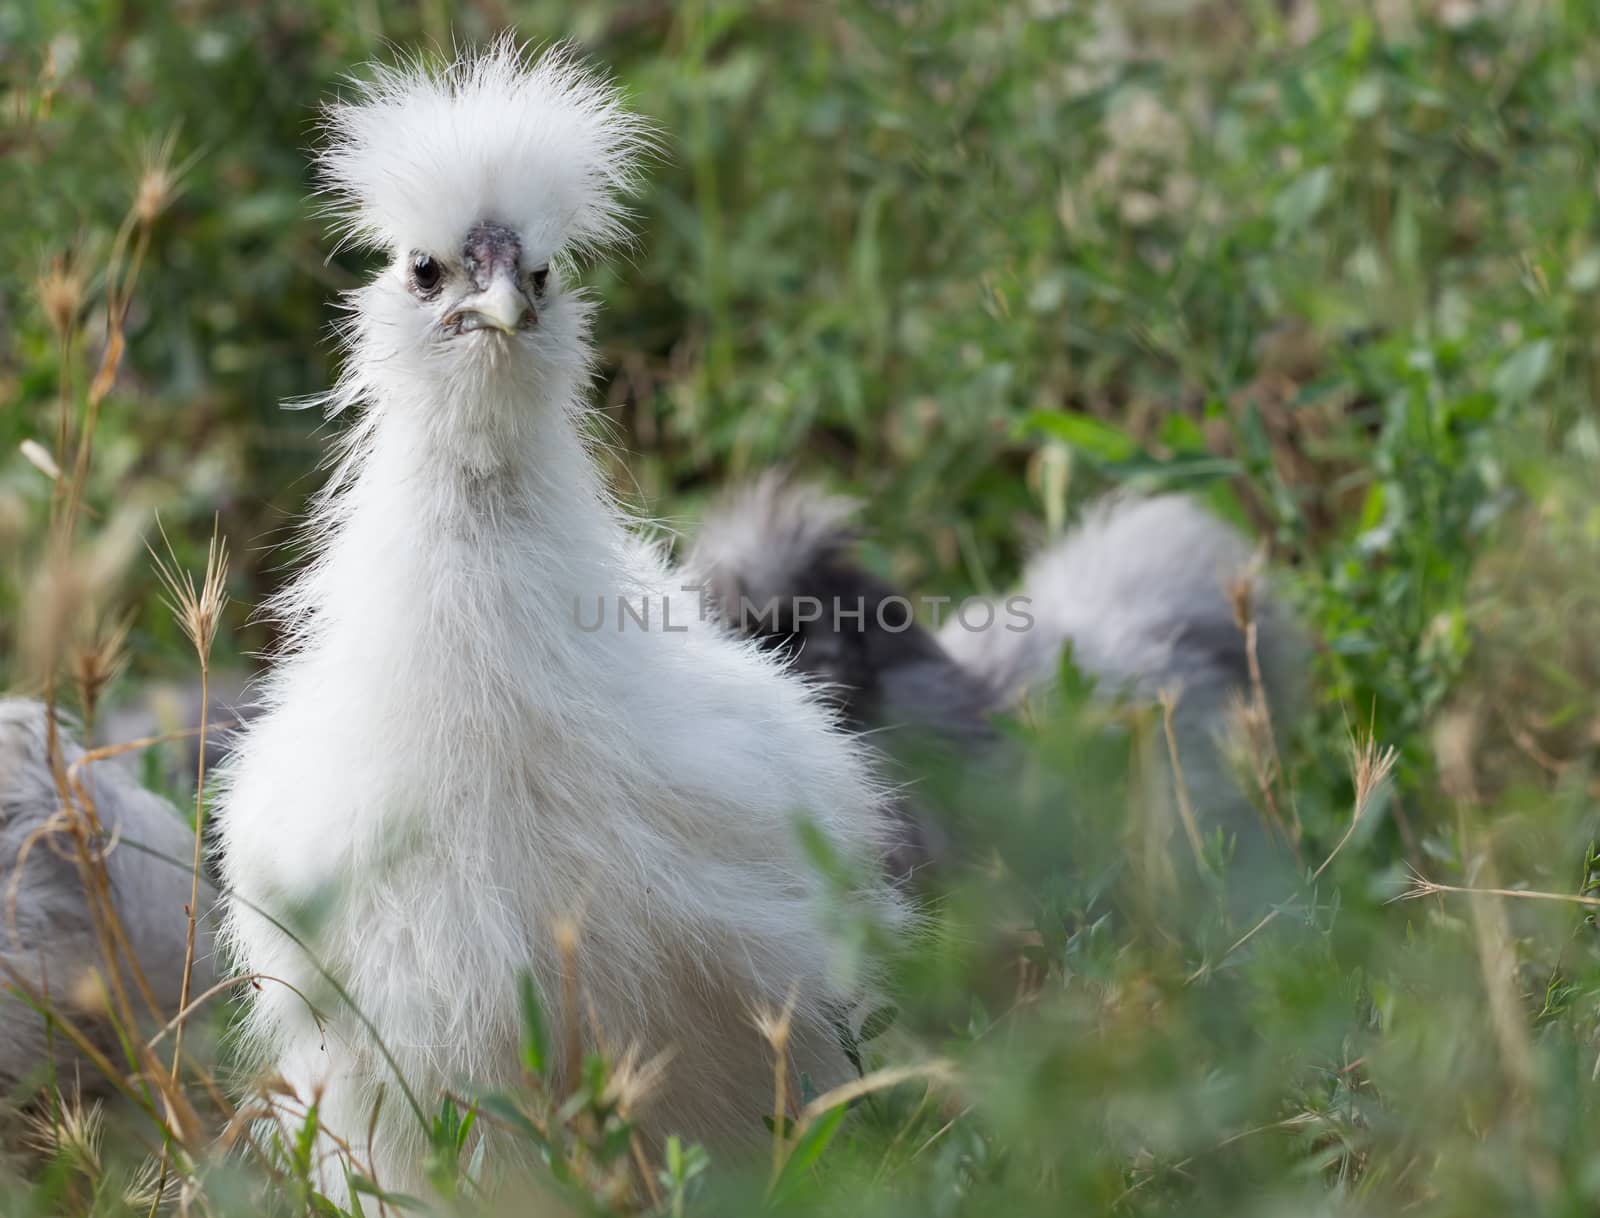 White fluffy chick - young rooster silkie chicken at the age of 3 months - with tousled sticking crest attentively looks ahead. Selective focus shot outside in natural light.